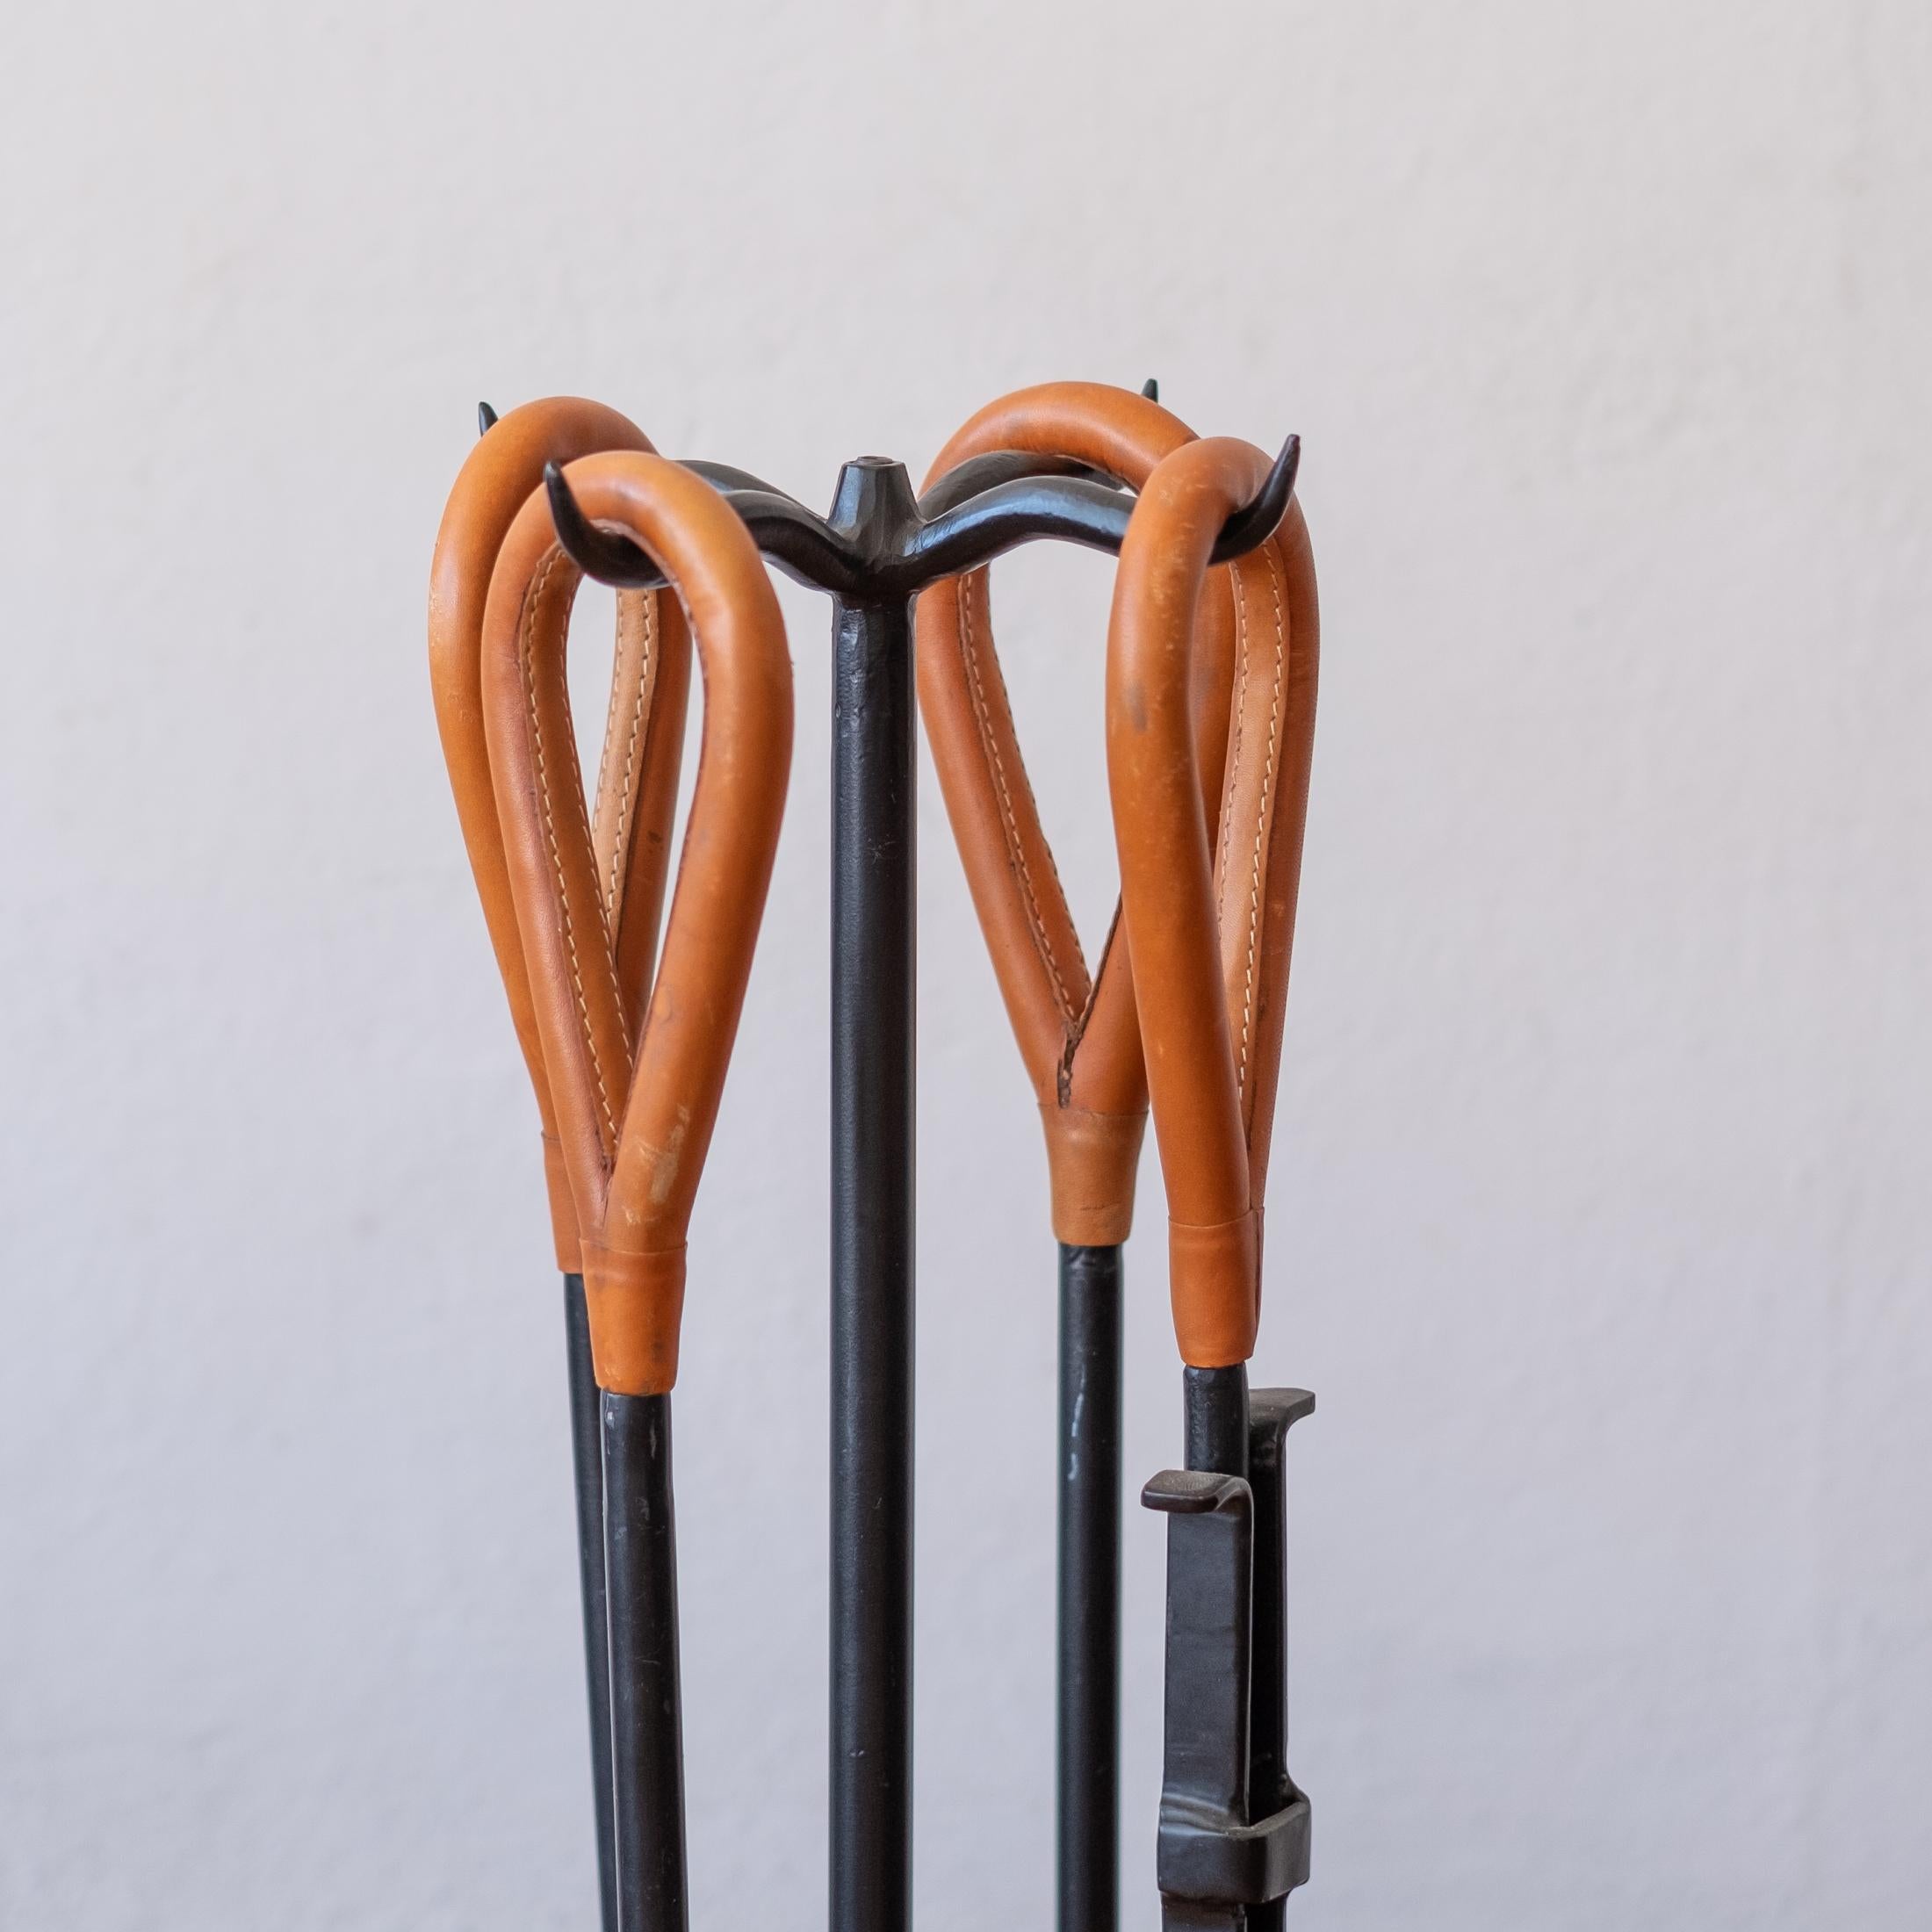 Late 20th Century Modernist Iron and Leather Handle Fire Place Tool Set After Jacques Adnet